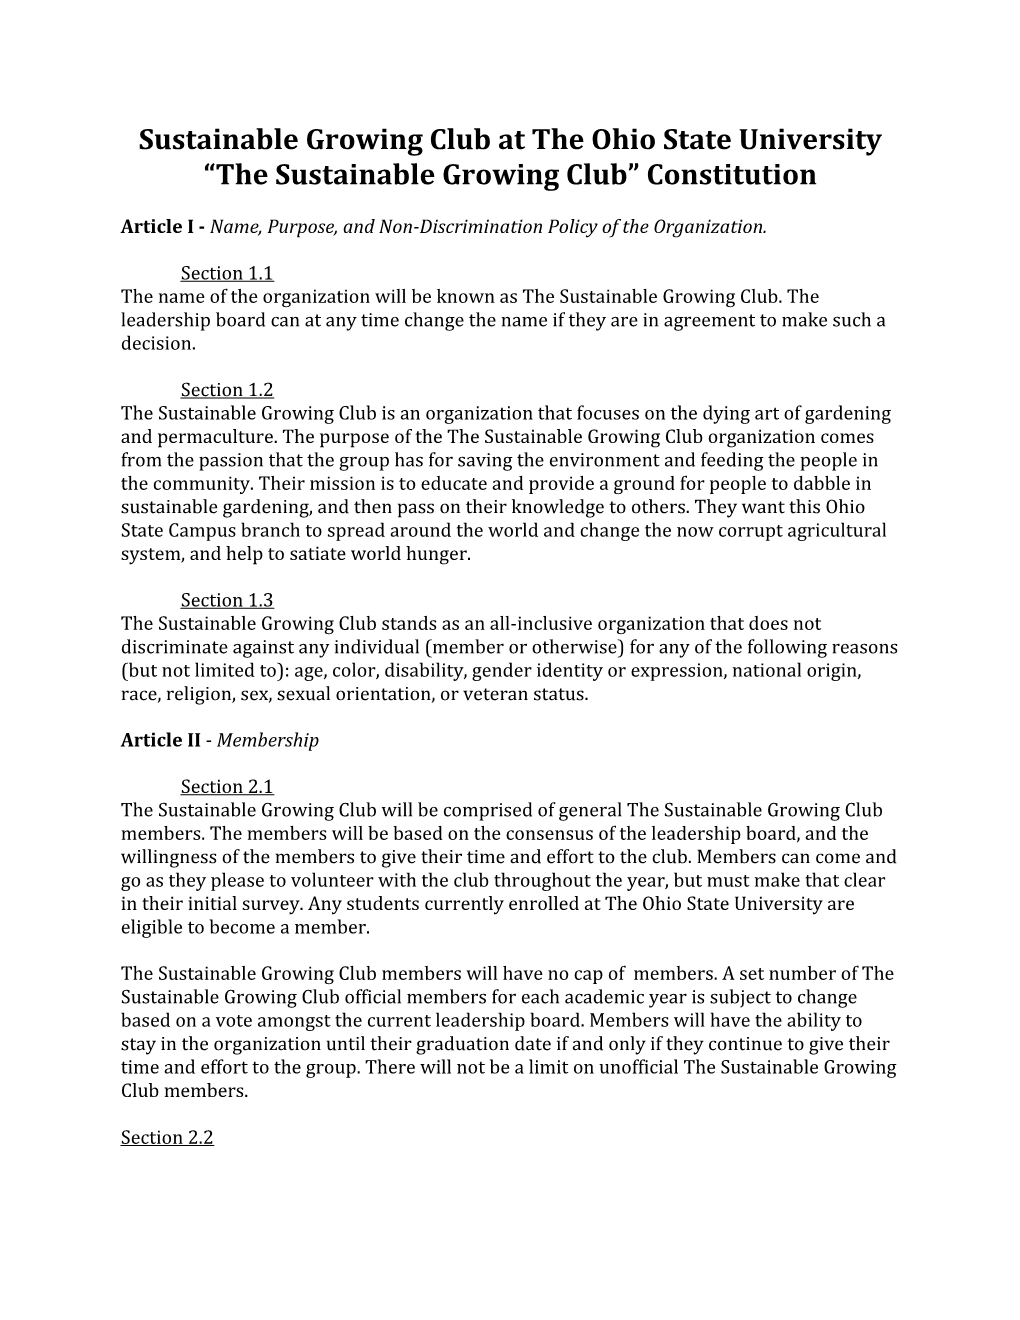 Sustainable Growing Club at the Ohio State University the Sustainable Growing Club Constitution